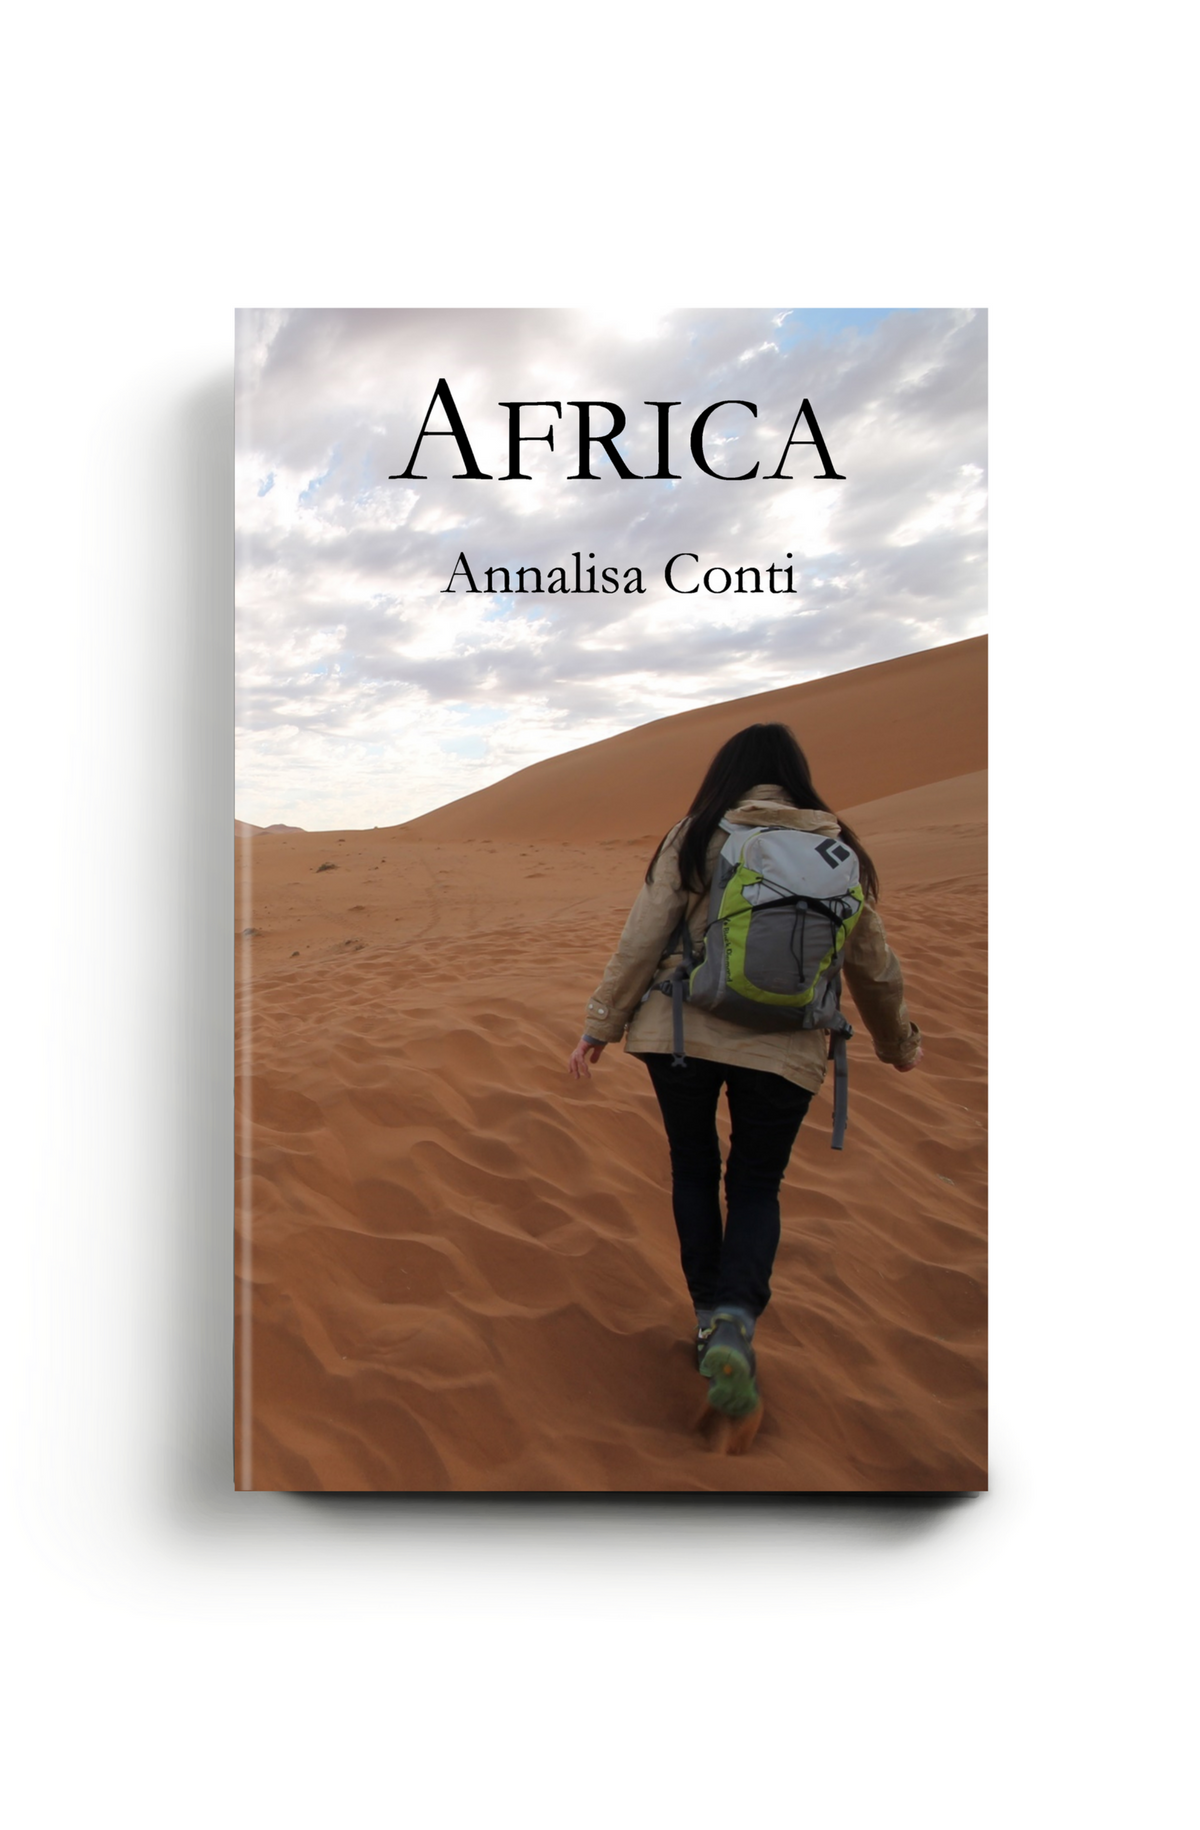 Africa by Annalisa Conti